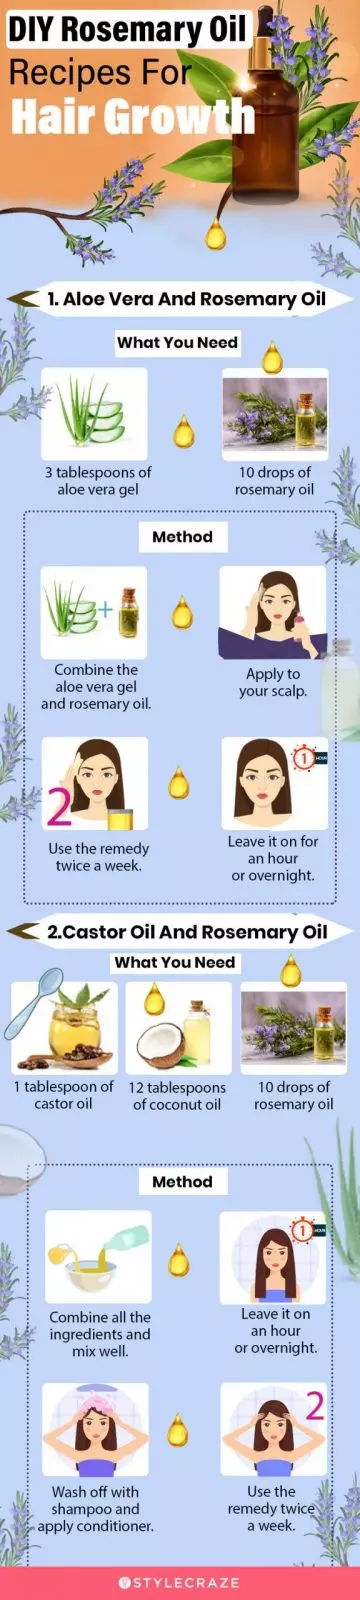 diy rosemary oil recipes for hair growth (infographic)